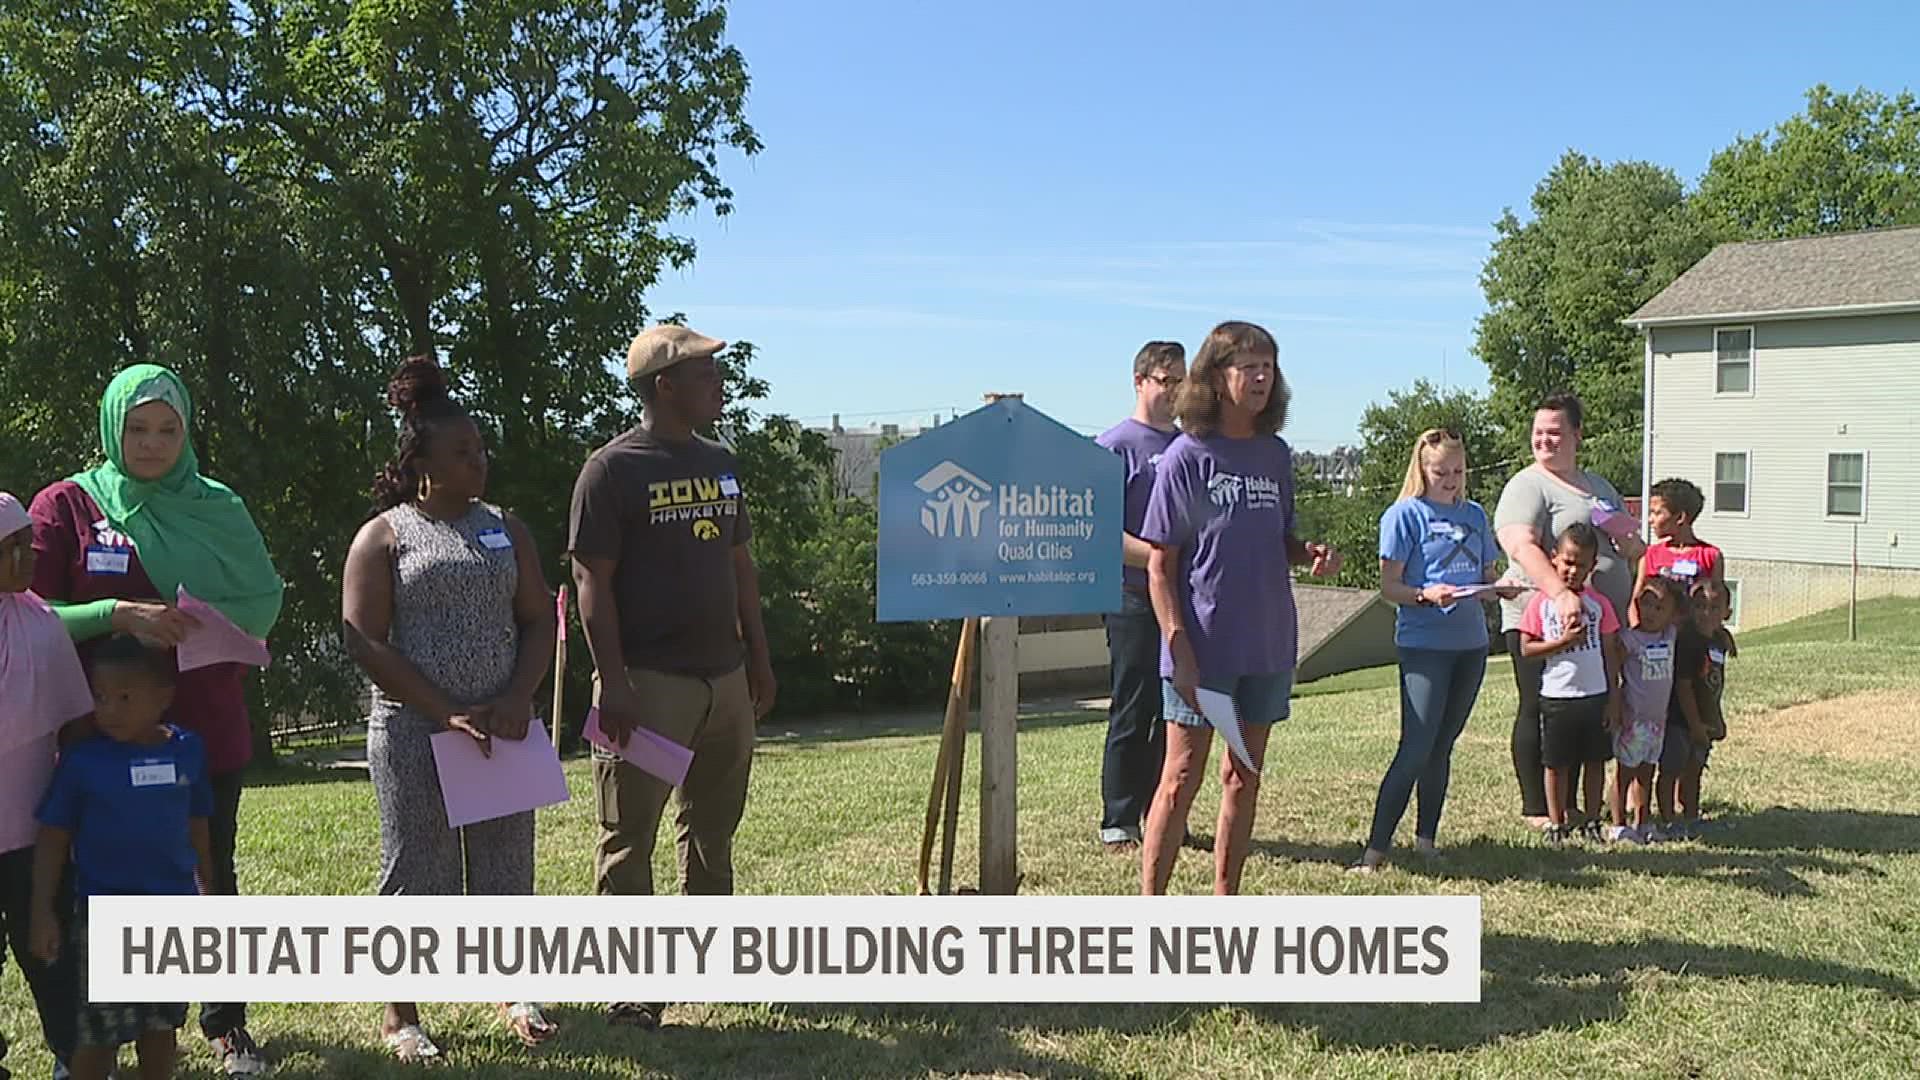 Habitat for Humanity has completed 125 home construction projects in the Quad Cities since it was founded in 1993.